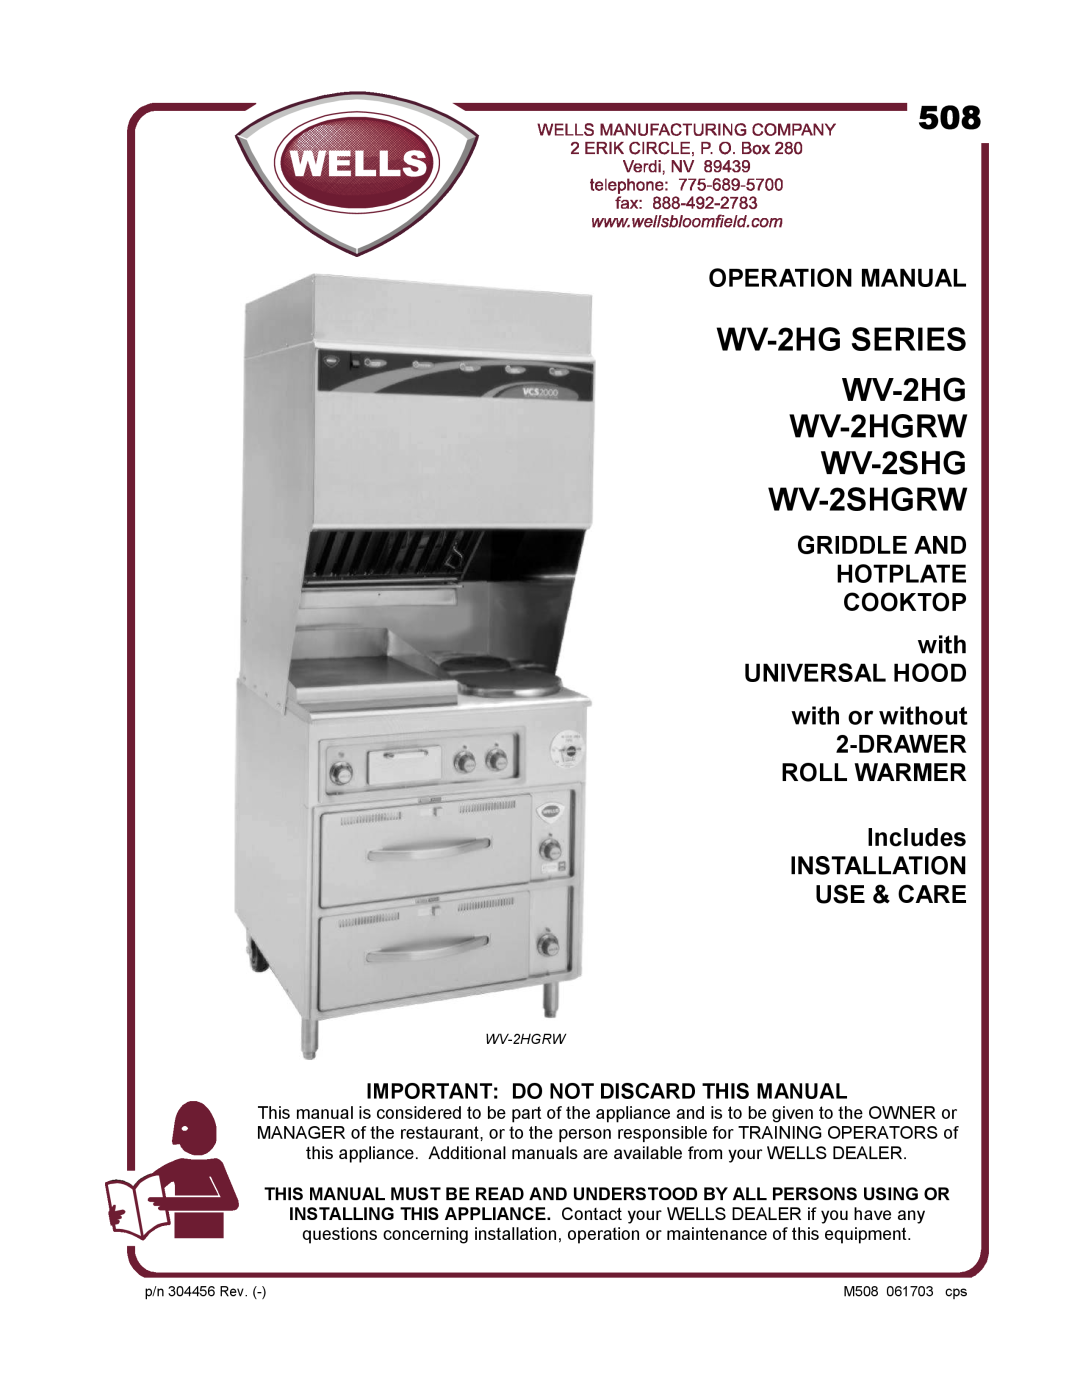 Wells WV-2HG operation manual with UNIVERSAL HOOD with or without 2-DRAWER ROLL WARMER Includes, Installation Use & Care 